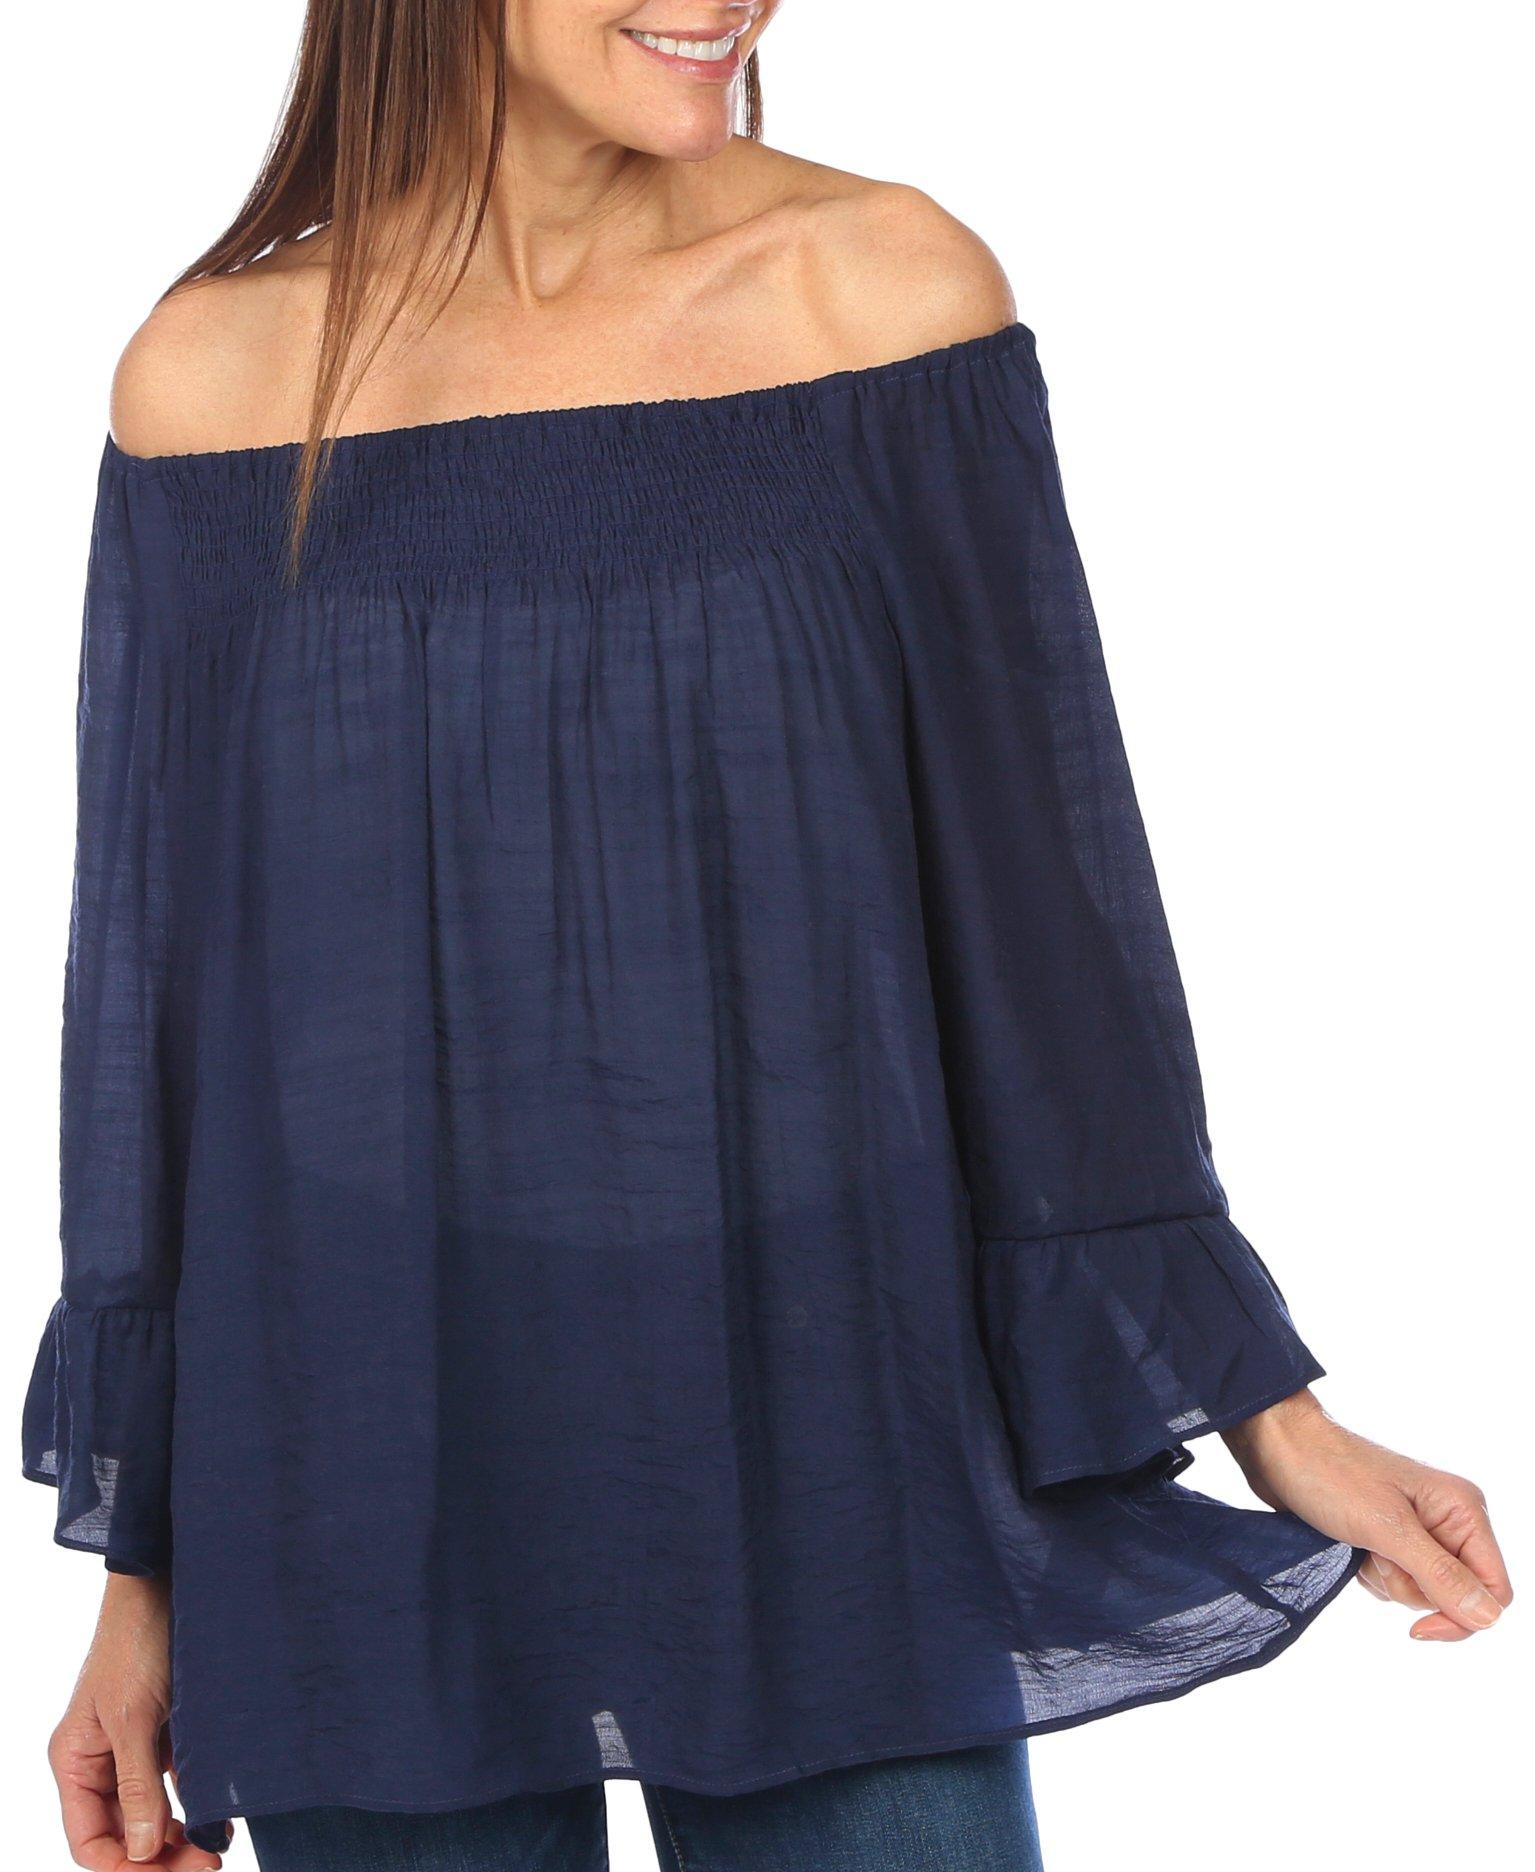 Womens Long Sleeve Off the Shoulder Top